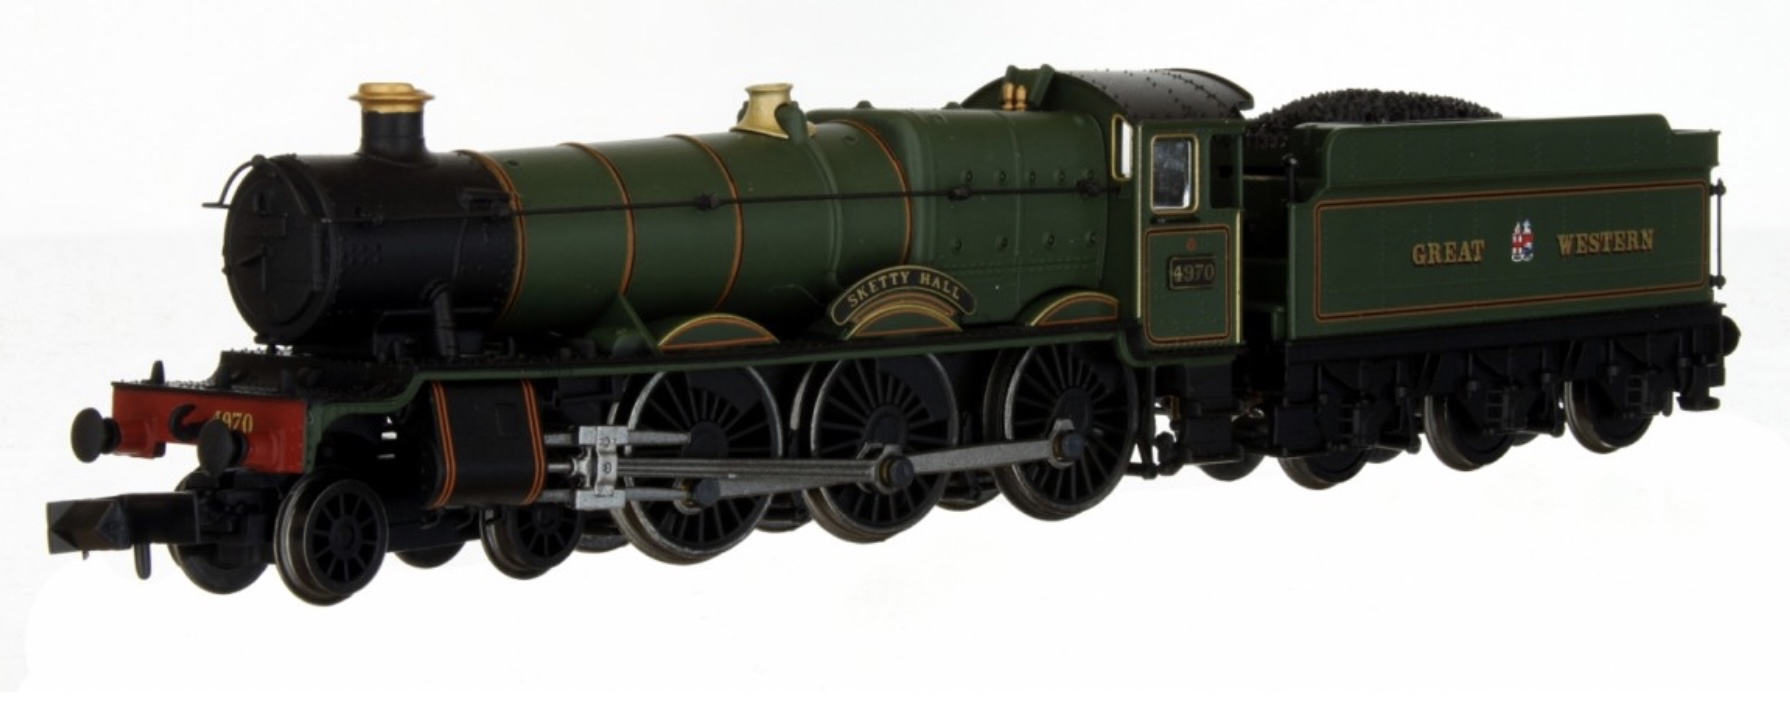 N Scale - Dapol - 2S-010-007D - Locomotive, Steam, 4-6-0 , 4900 Class Hall - Great Western - 4970